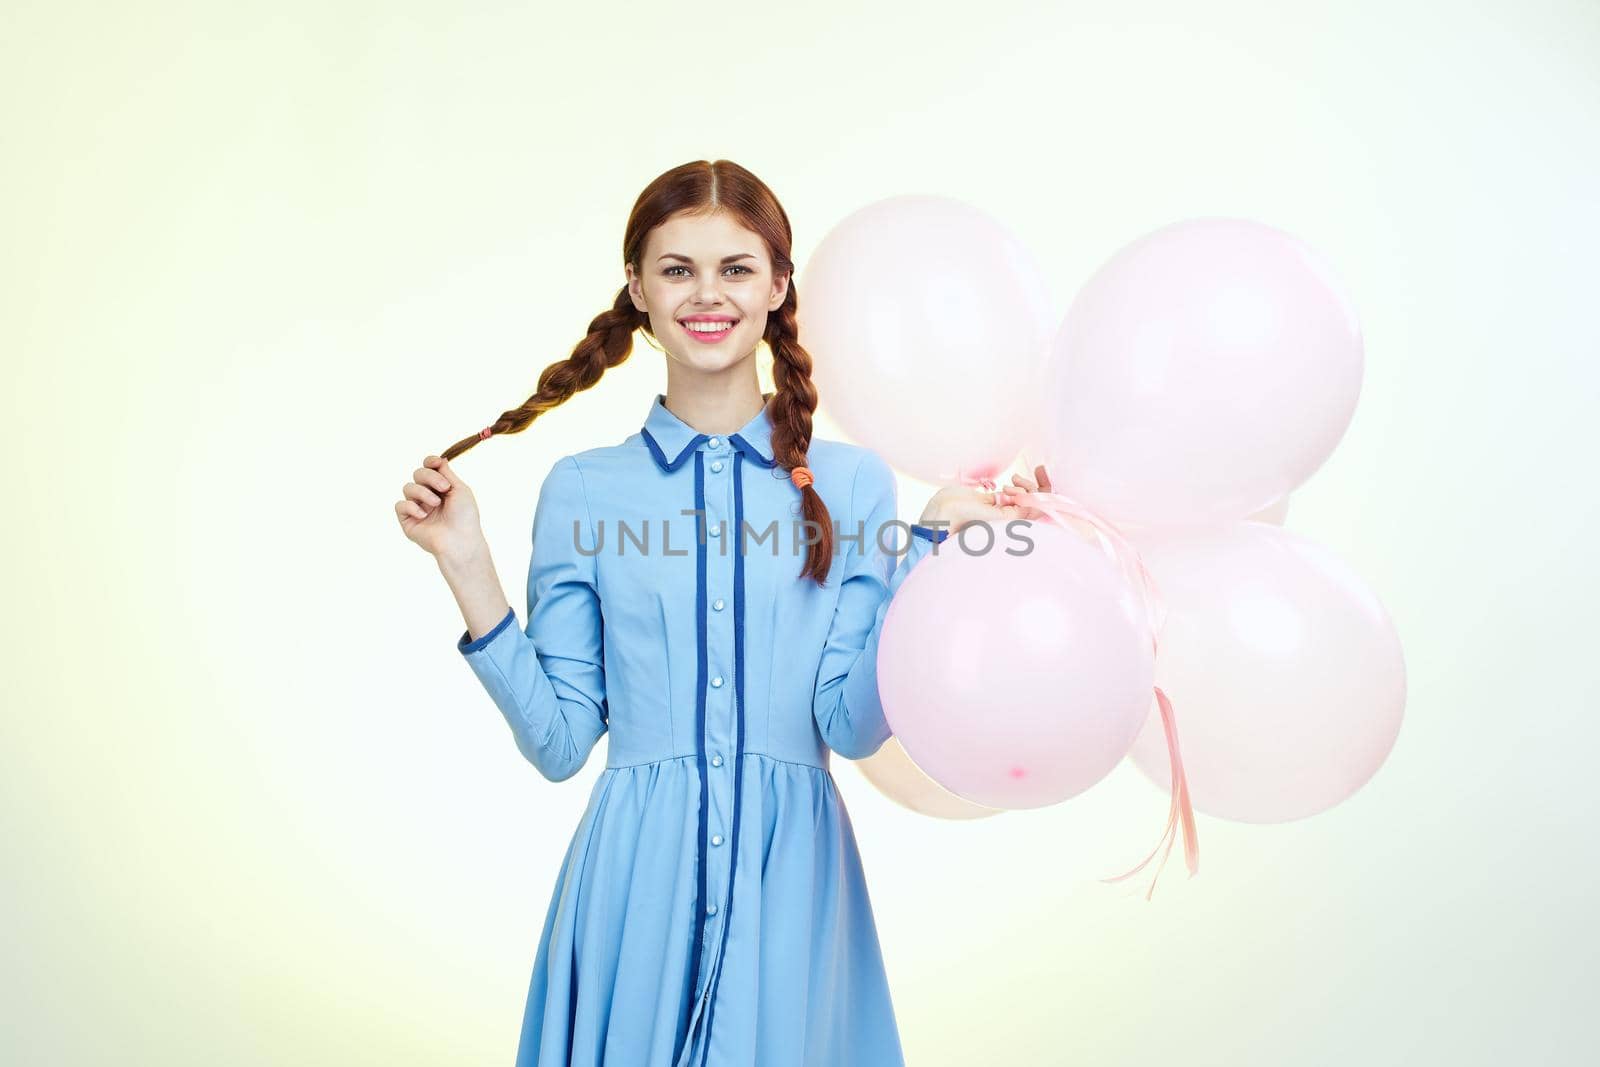 pretty woman with pigtails decoration holiday fun light background. High quality photo